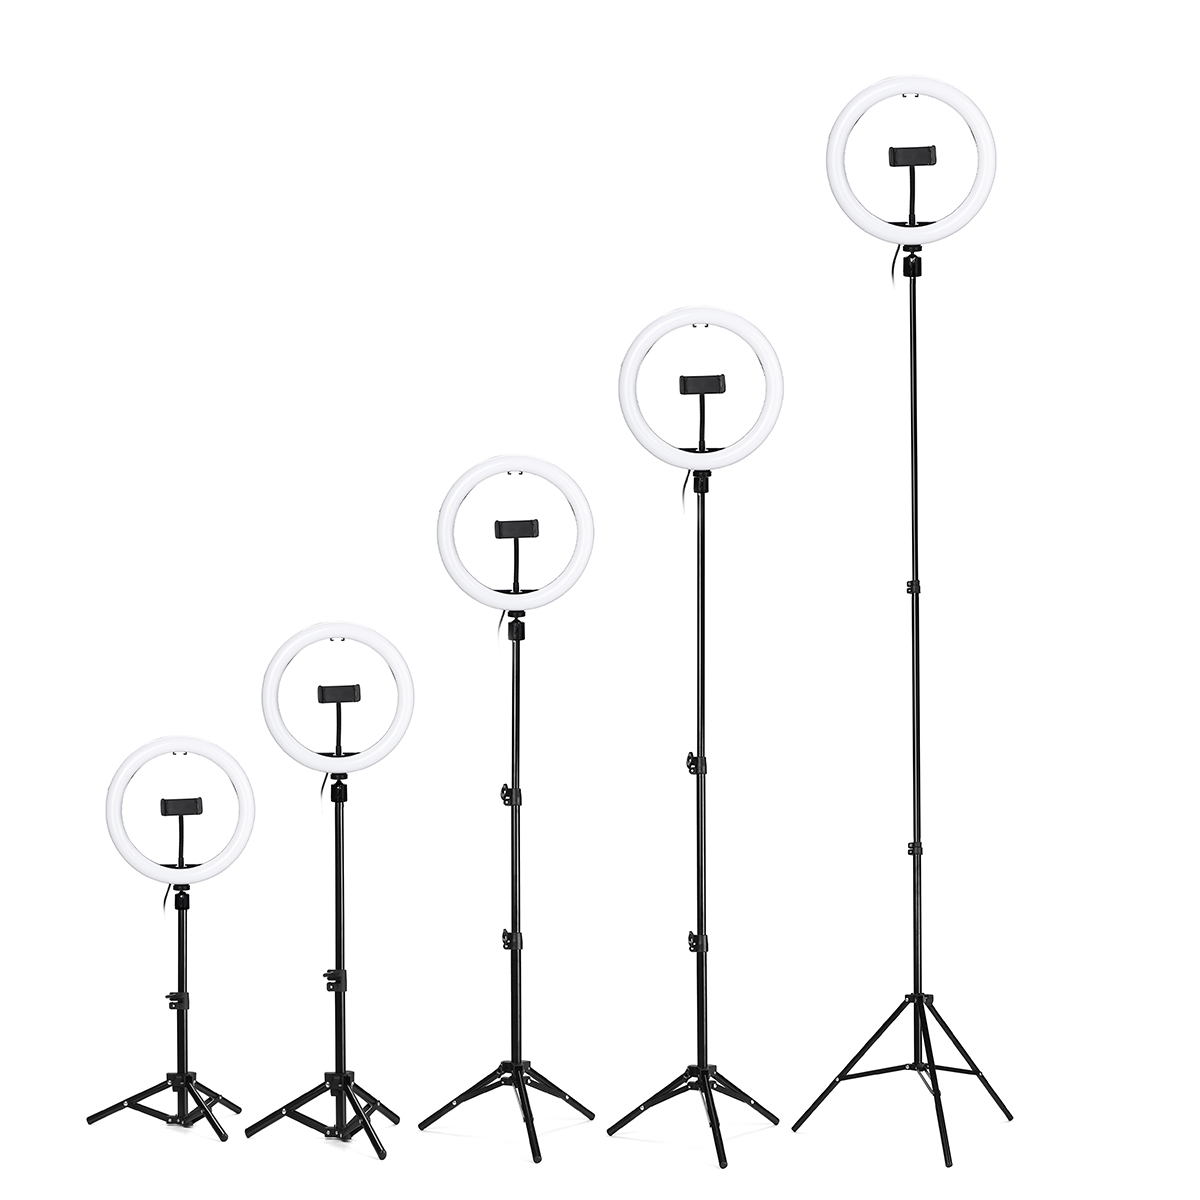 710131518-Inch-LED-Ring-Light-Studio-Fill-Light-Tripod-Stand-Photo-Makeup-Live-Dimmable-Lamp-for-You-1708205-7